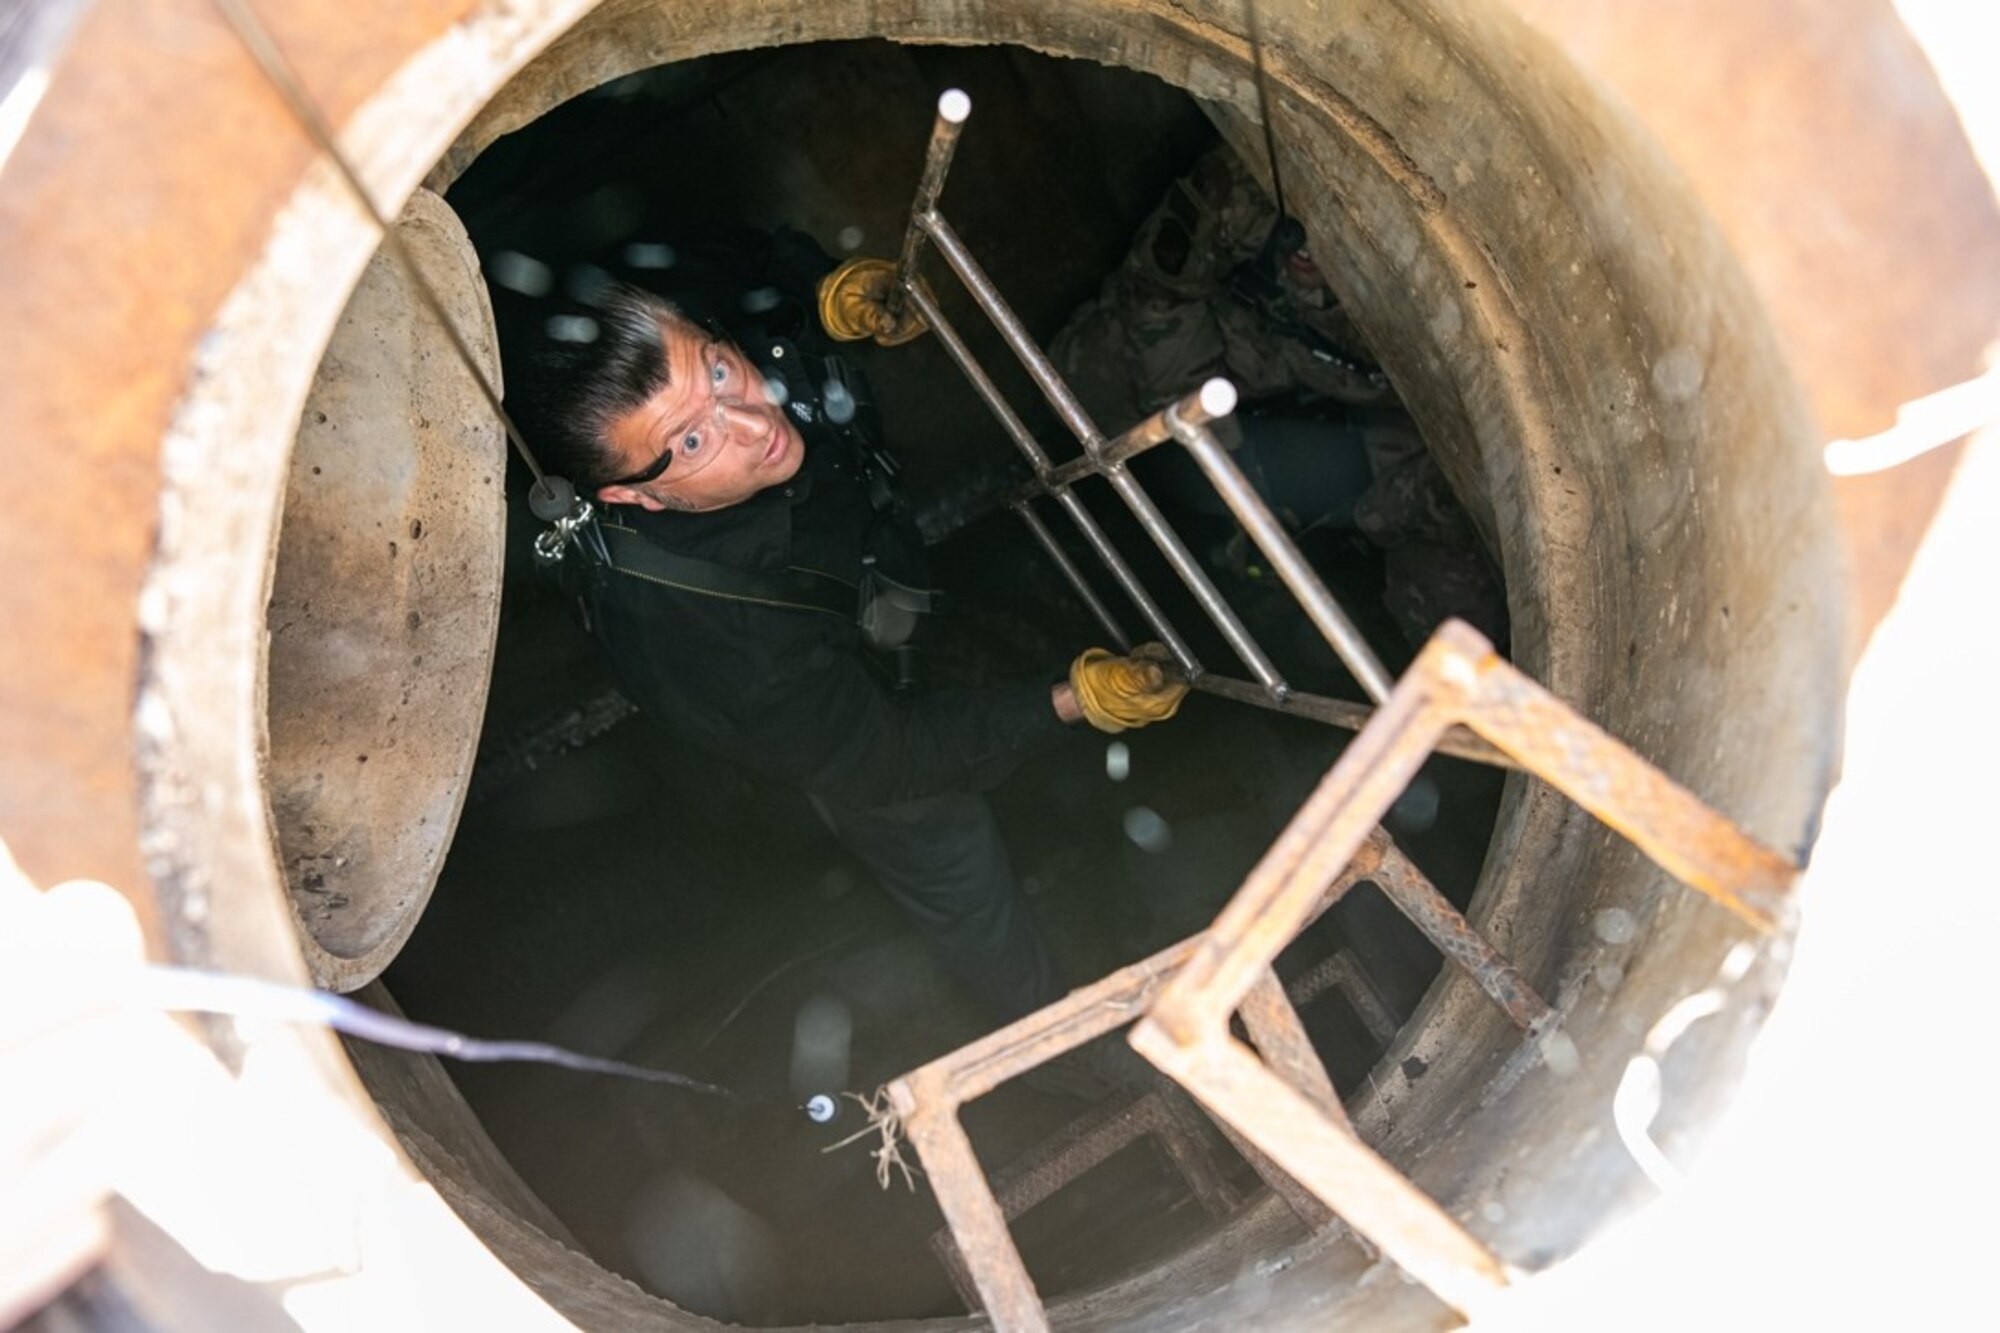 Ken Long, an engineering equipment operator assigned to the 28th Civil Engineer Squadron, hands a grate up to Airmen waiting outside of a confined space on Ellsworth Air Force Base, S.D., May 18, 2021.